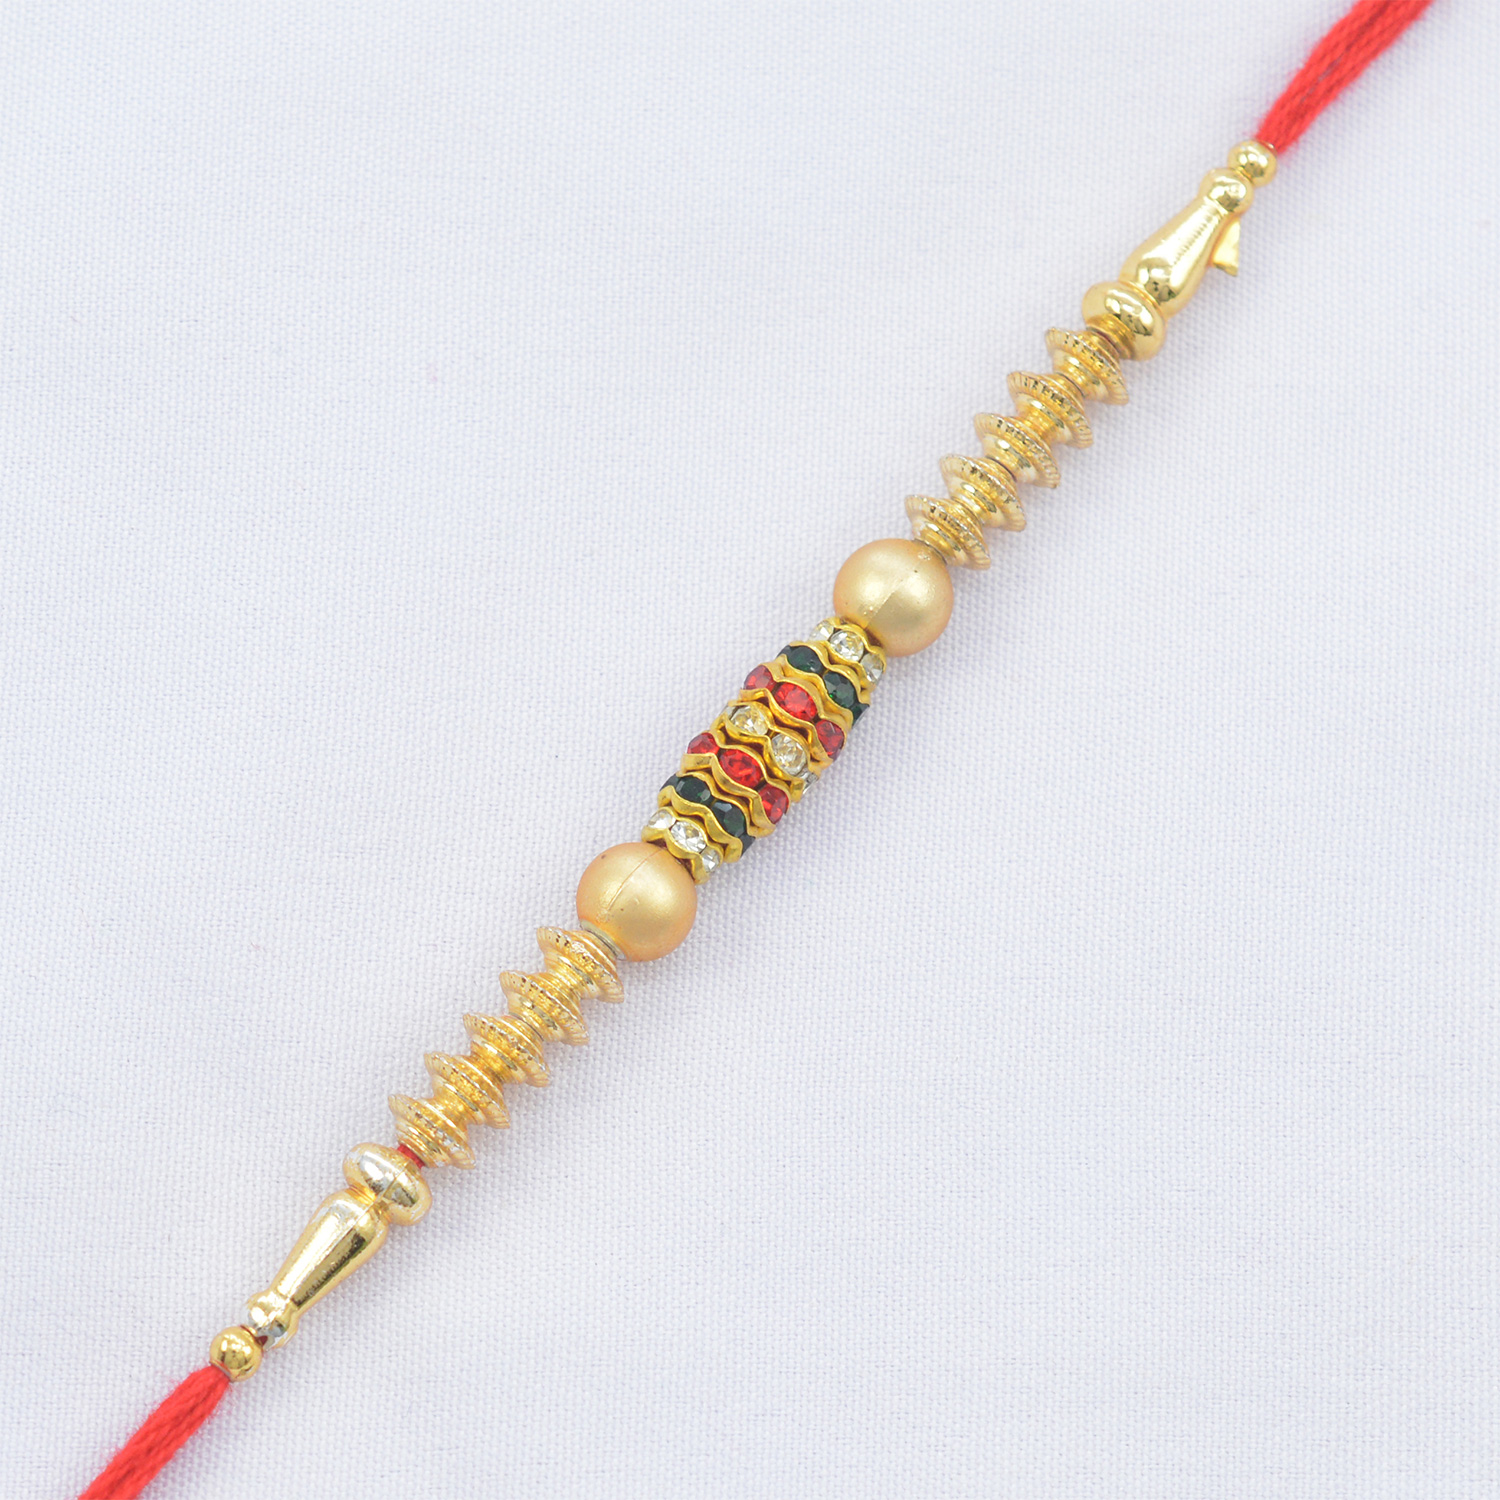 Amazing Multi-color Jewel Thread Rakhi with Attractive White Pearl 